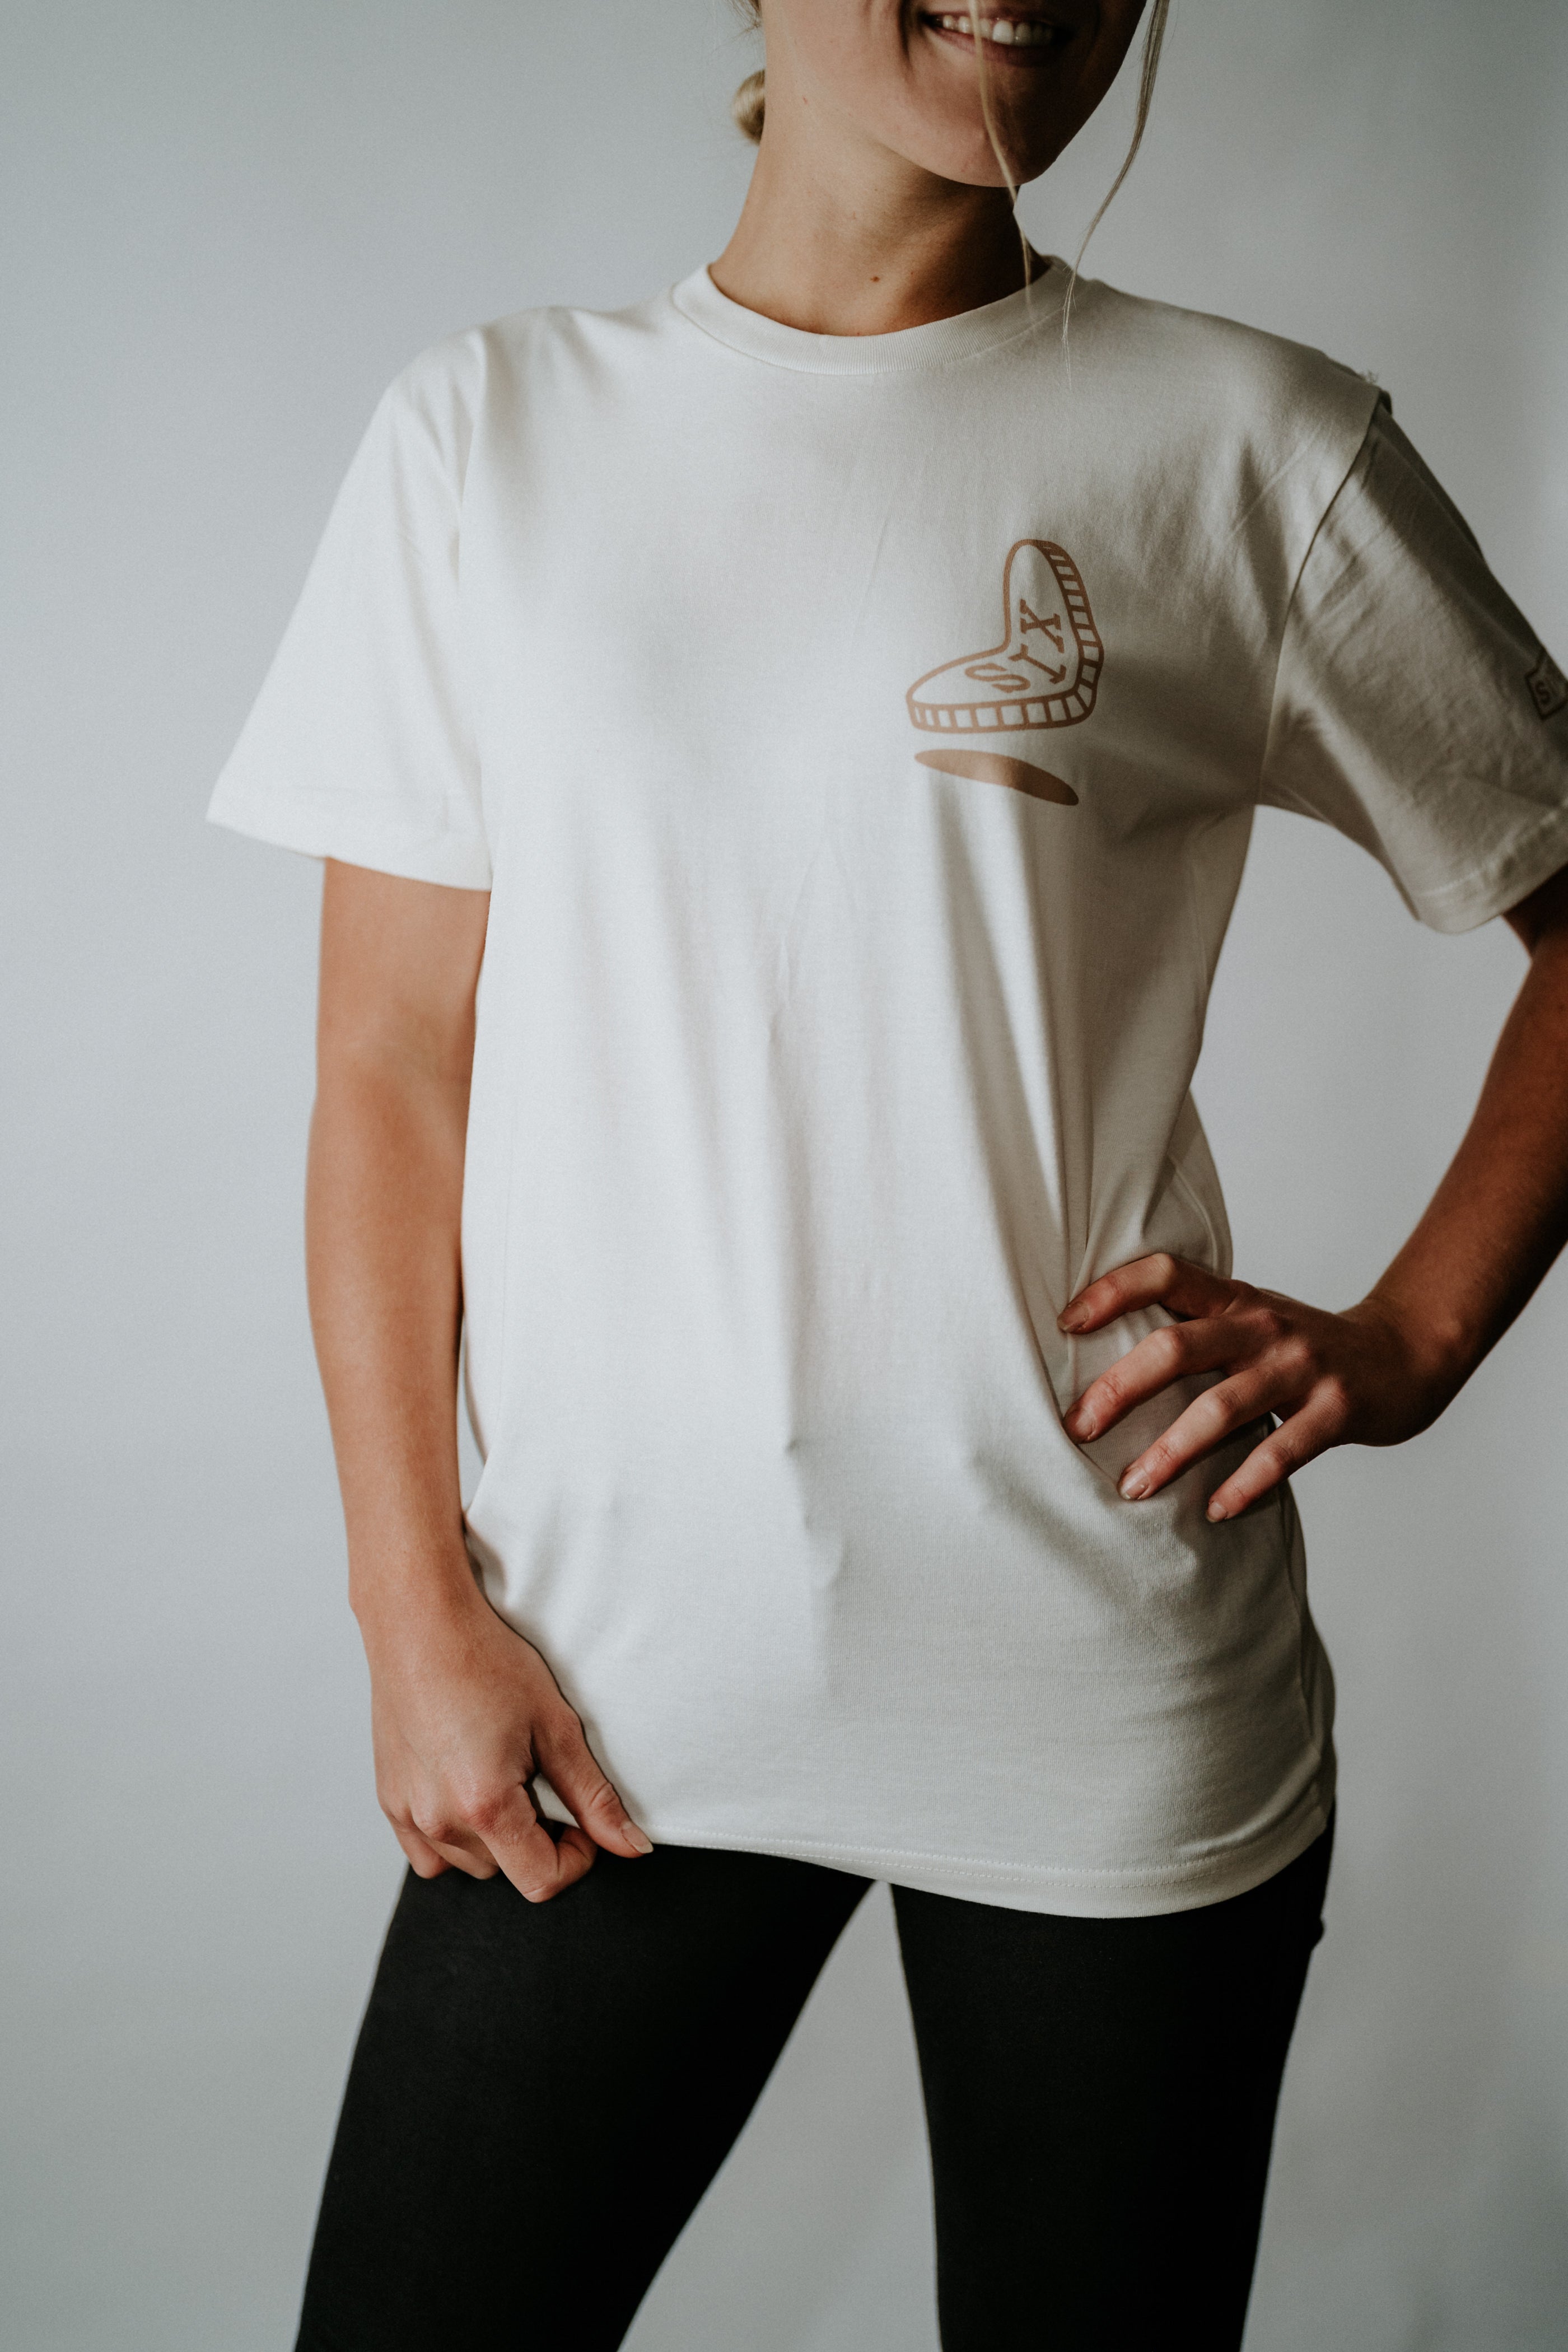 Sixpence Twisted Coin Illustration Tee